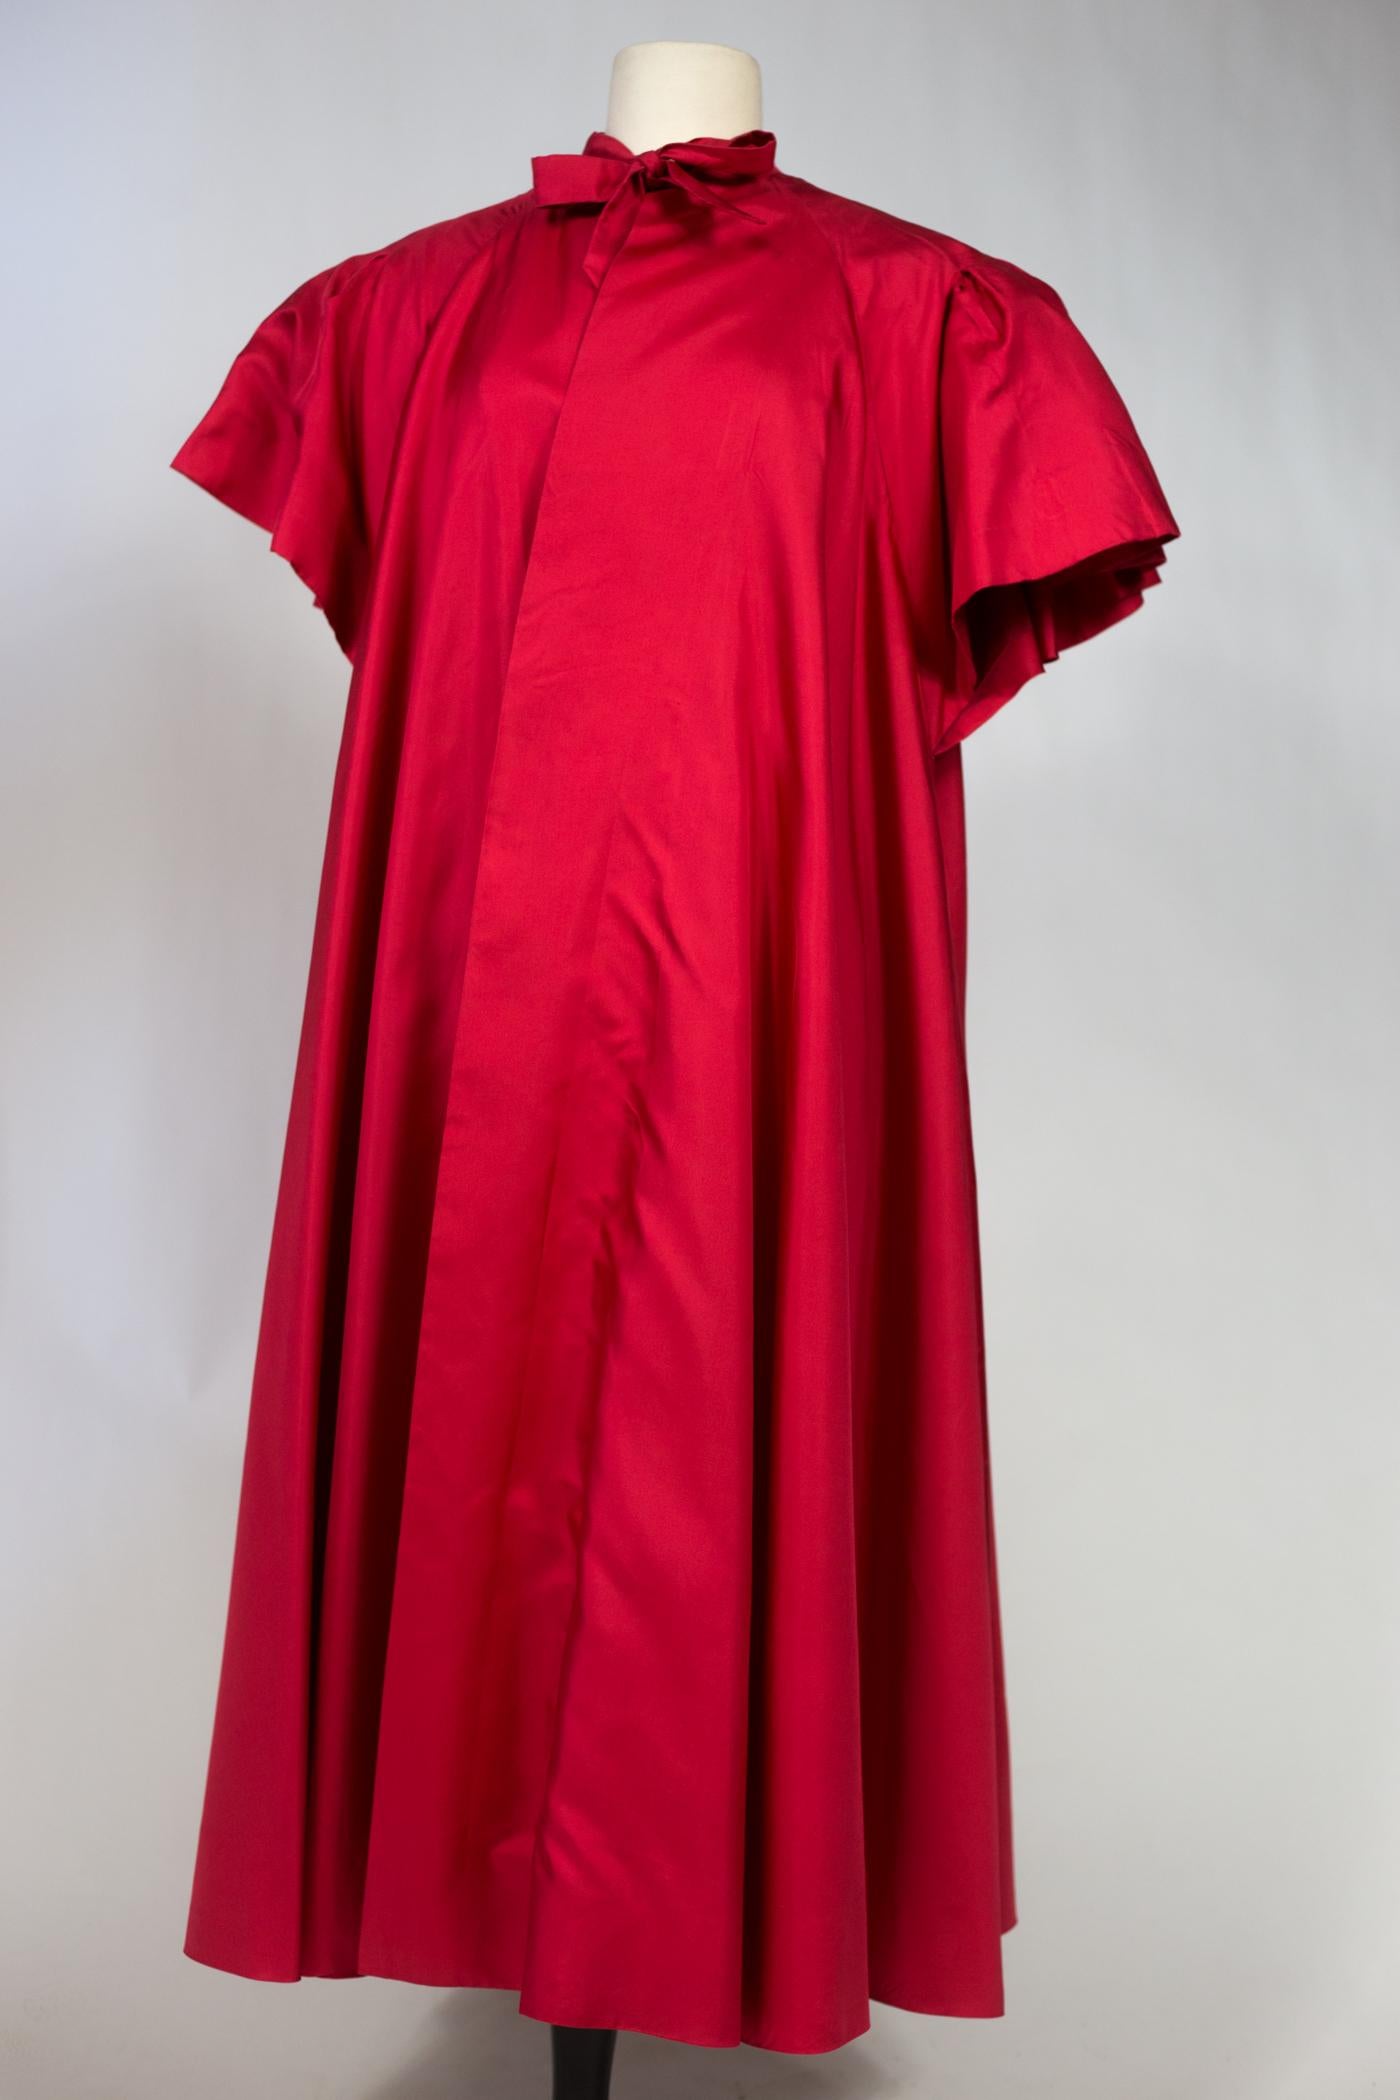 An Evening Maggy Rouff French Haute Couture Red Silk Coat Circa 1955 4